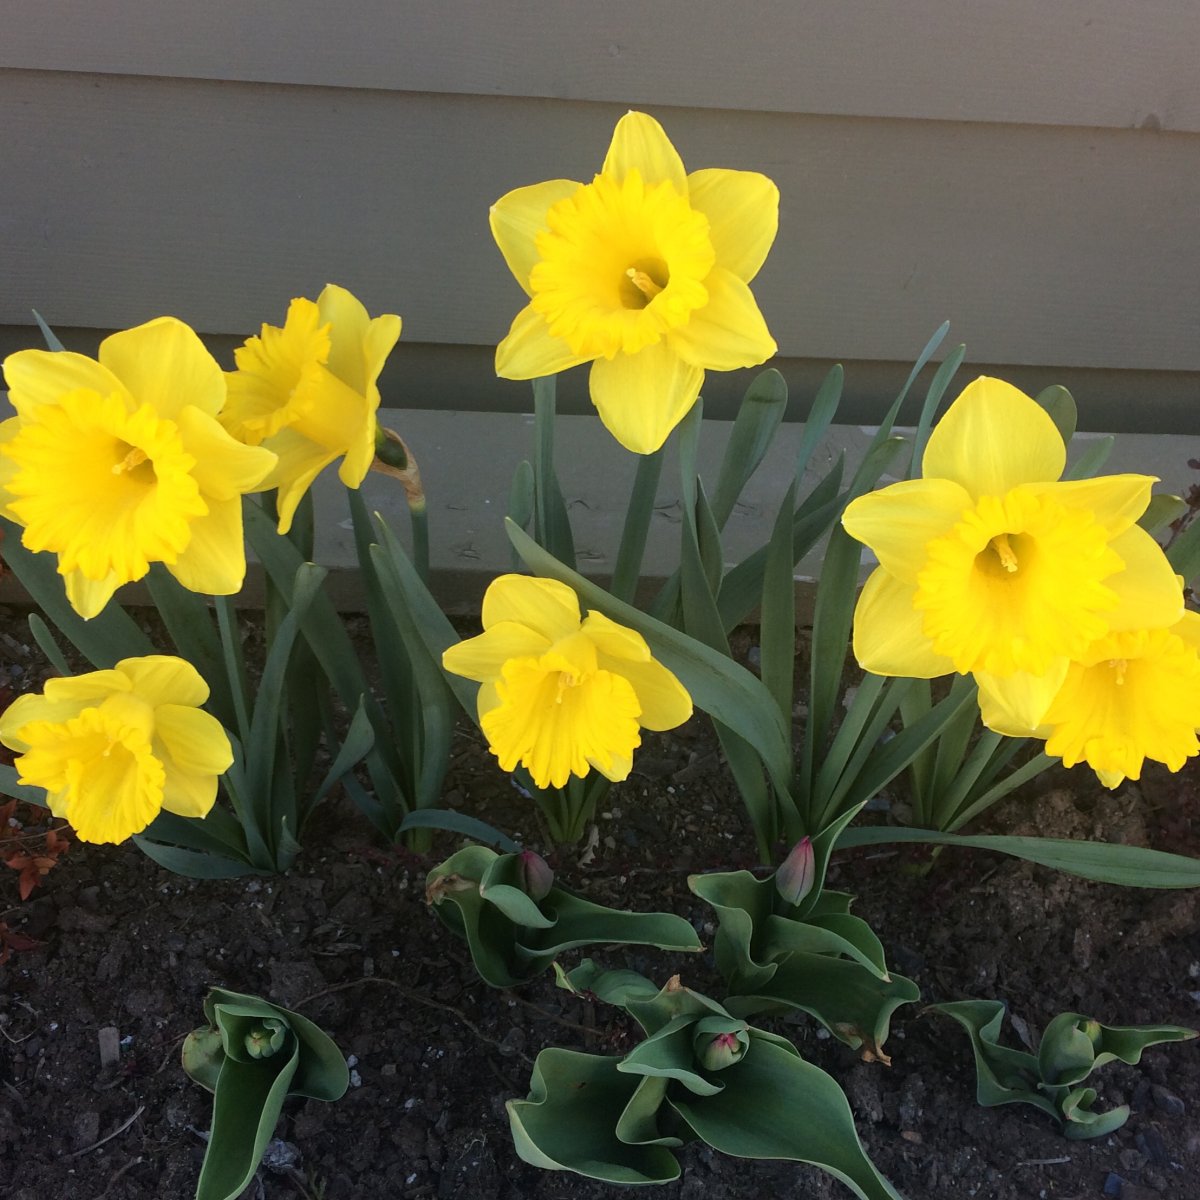 Cancer society makes plea for donations in light of ruined daffodils - image